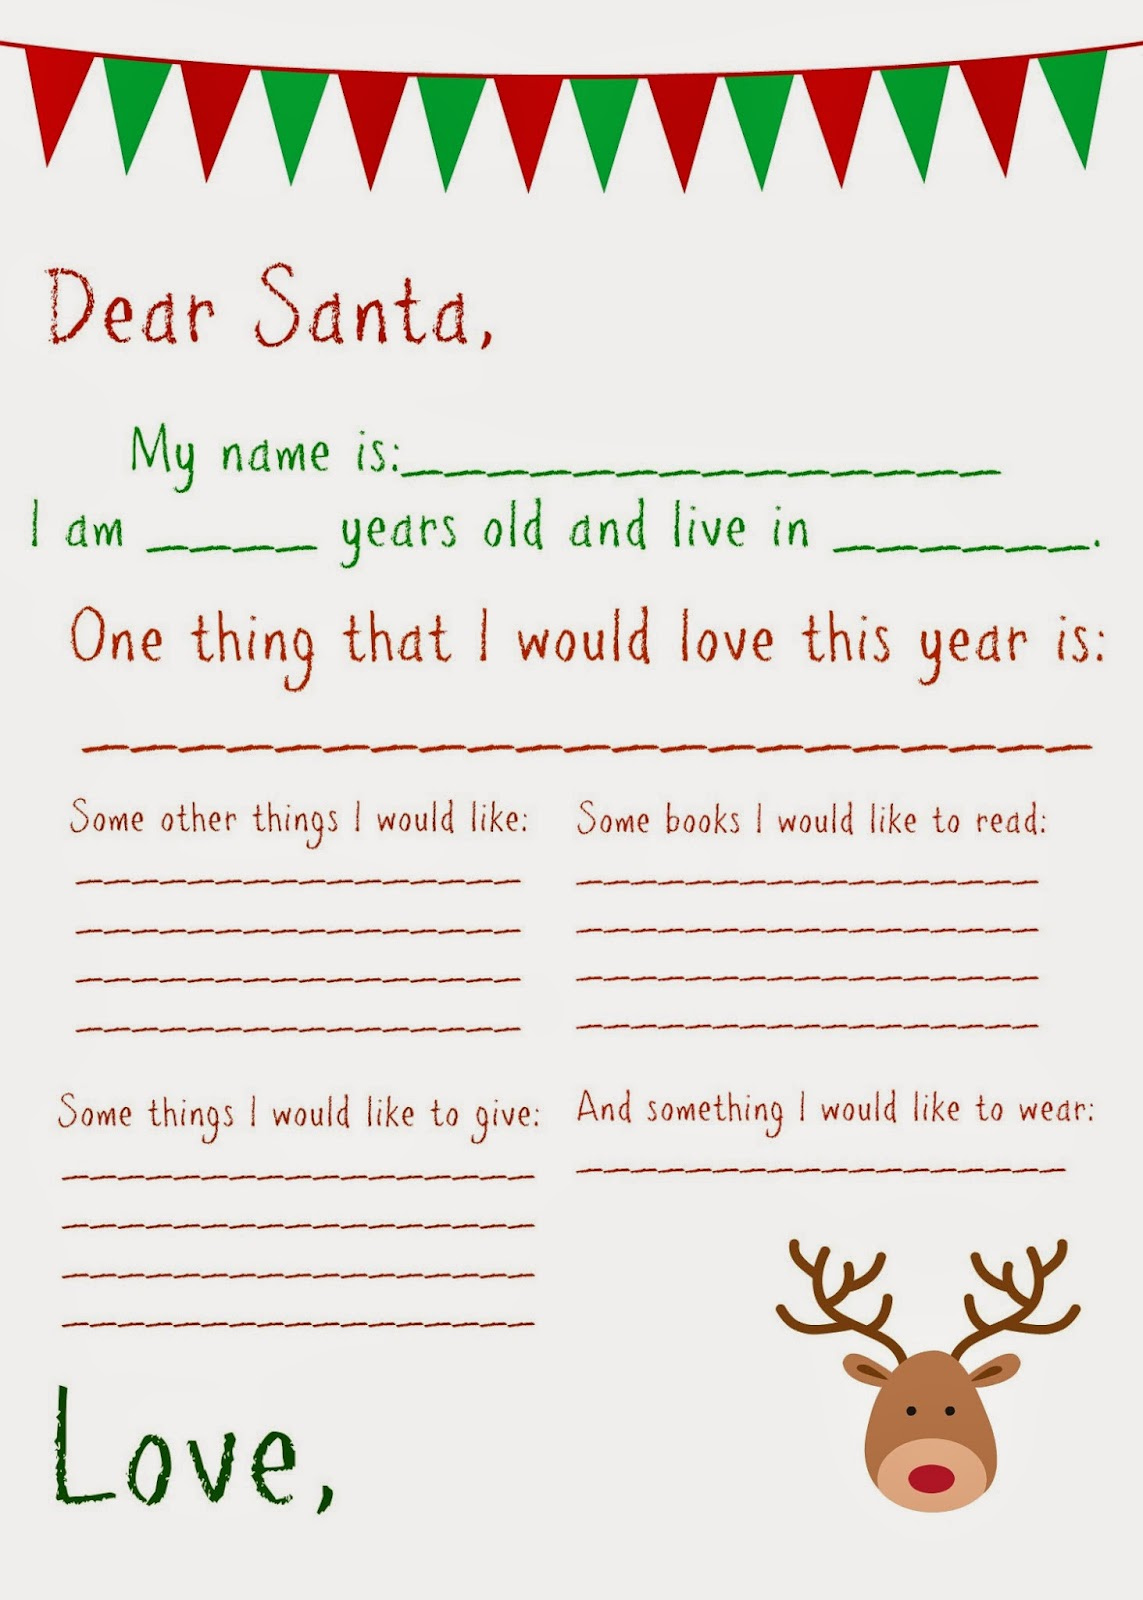 Have You Done Santa Letters Yet Print One Of These 5 Cool Letters Now 